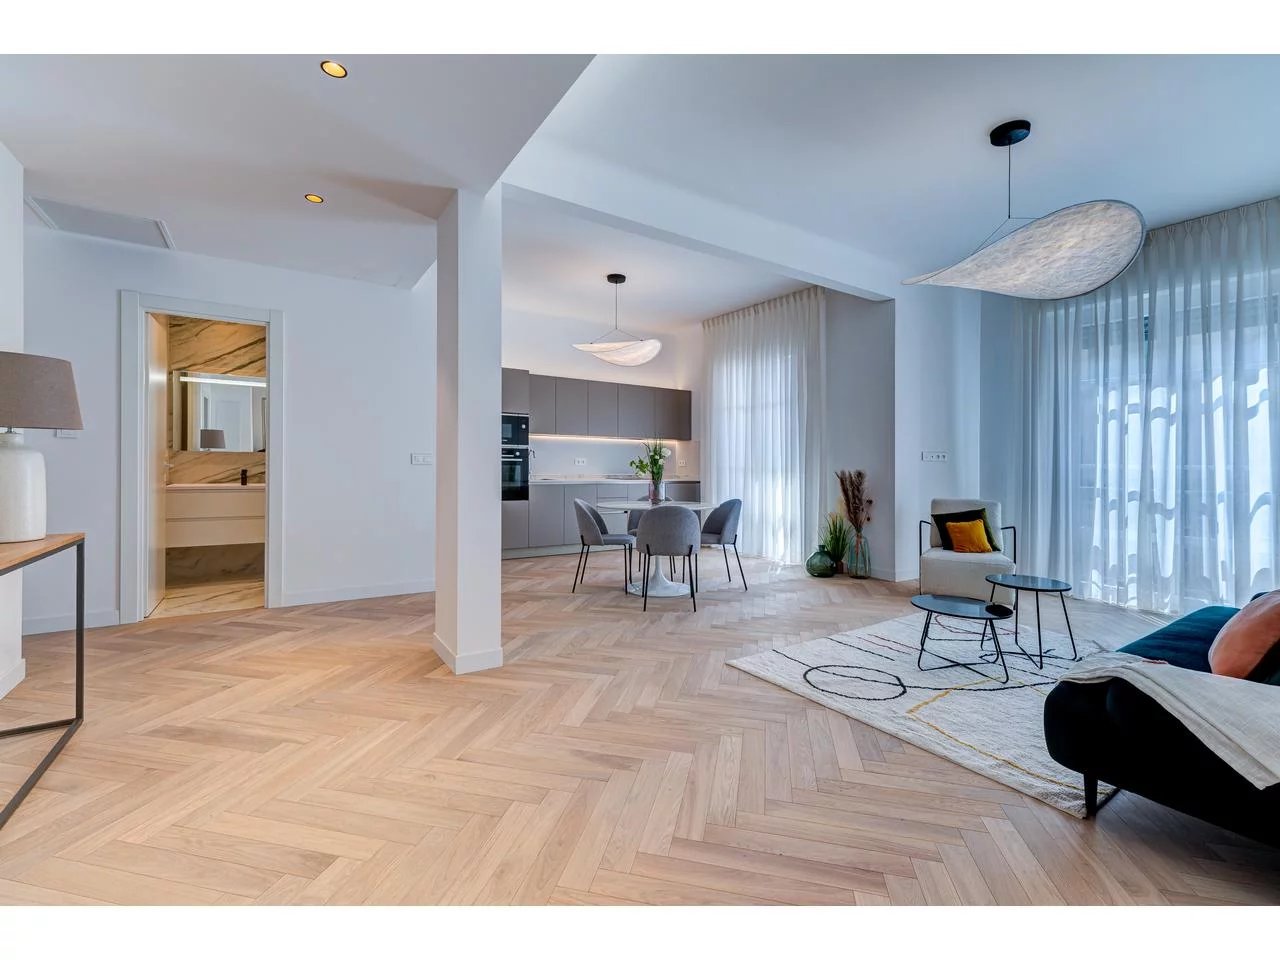 Appartement  3 Rooms 71m2  for sale   699 000 €